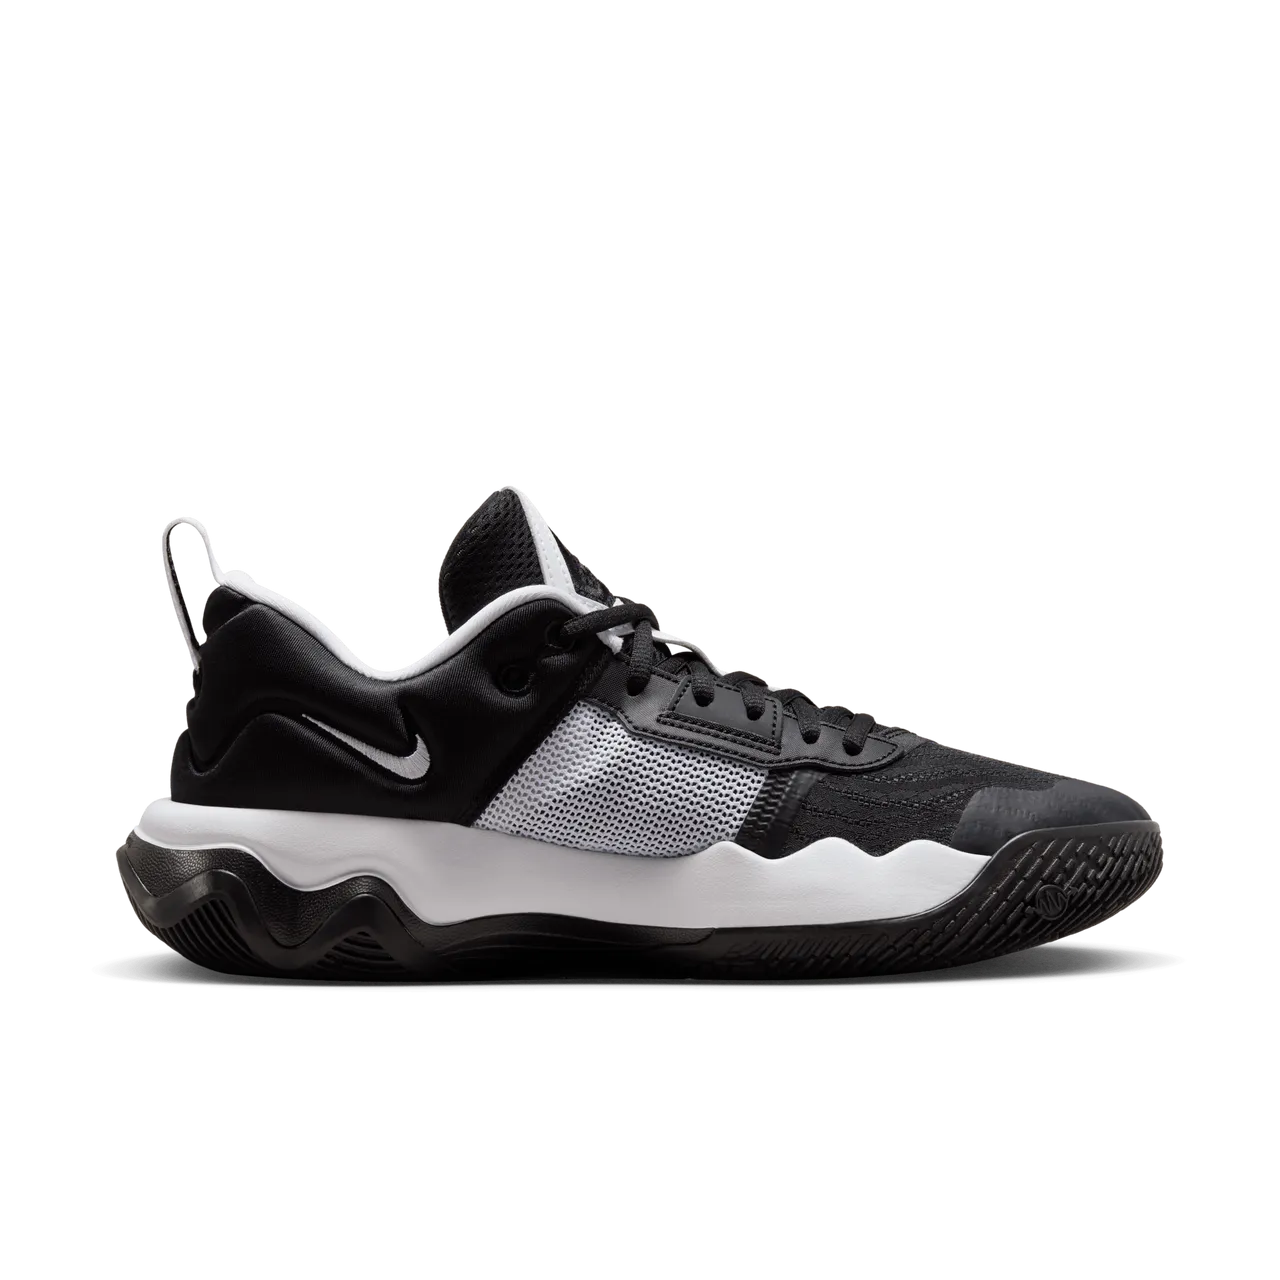 Giannis Immortality 3 'Made in Sepolia' Basketball Shoes - Black